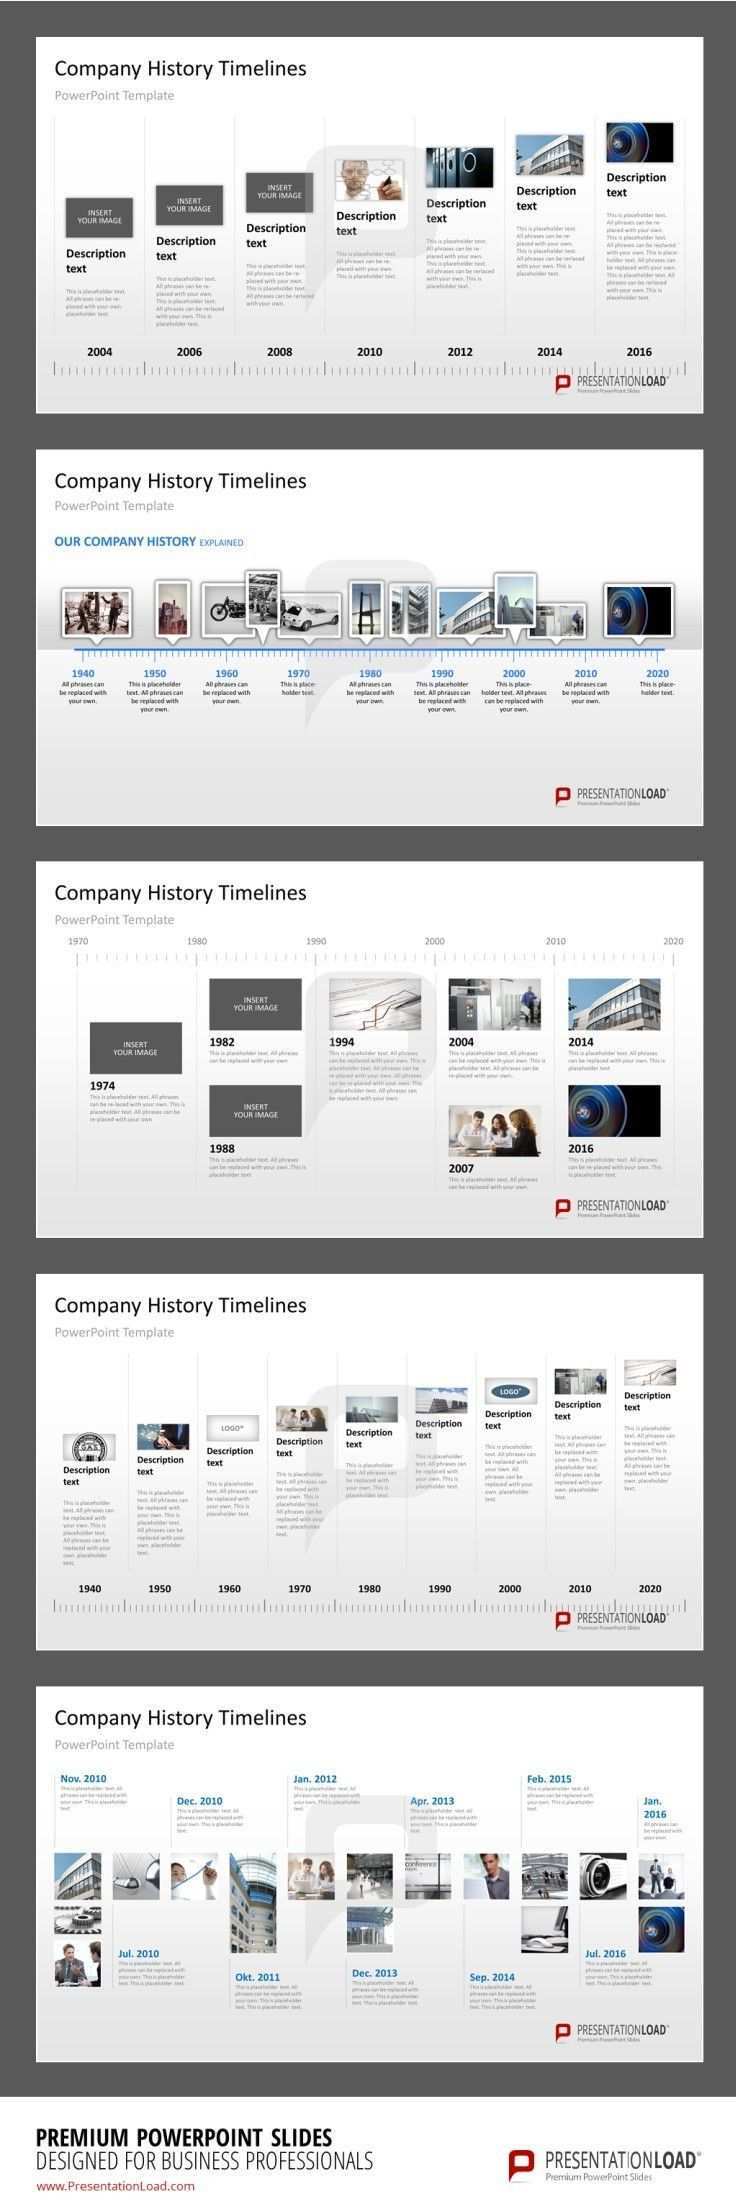 Company History Milestones In A Timeline Powerpoint Template Presentationload Www Presentationl Timeline Design History Design History Infographic